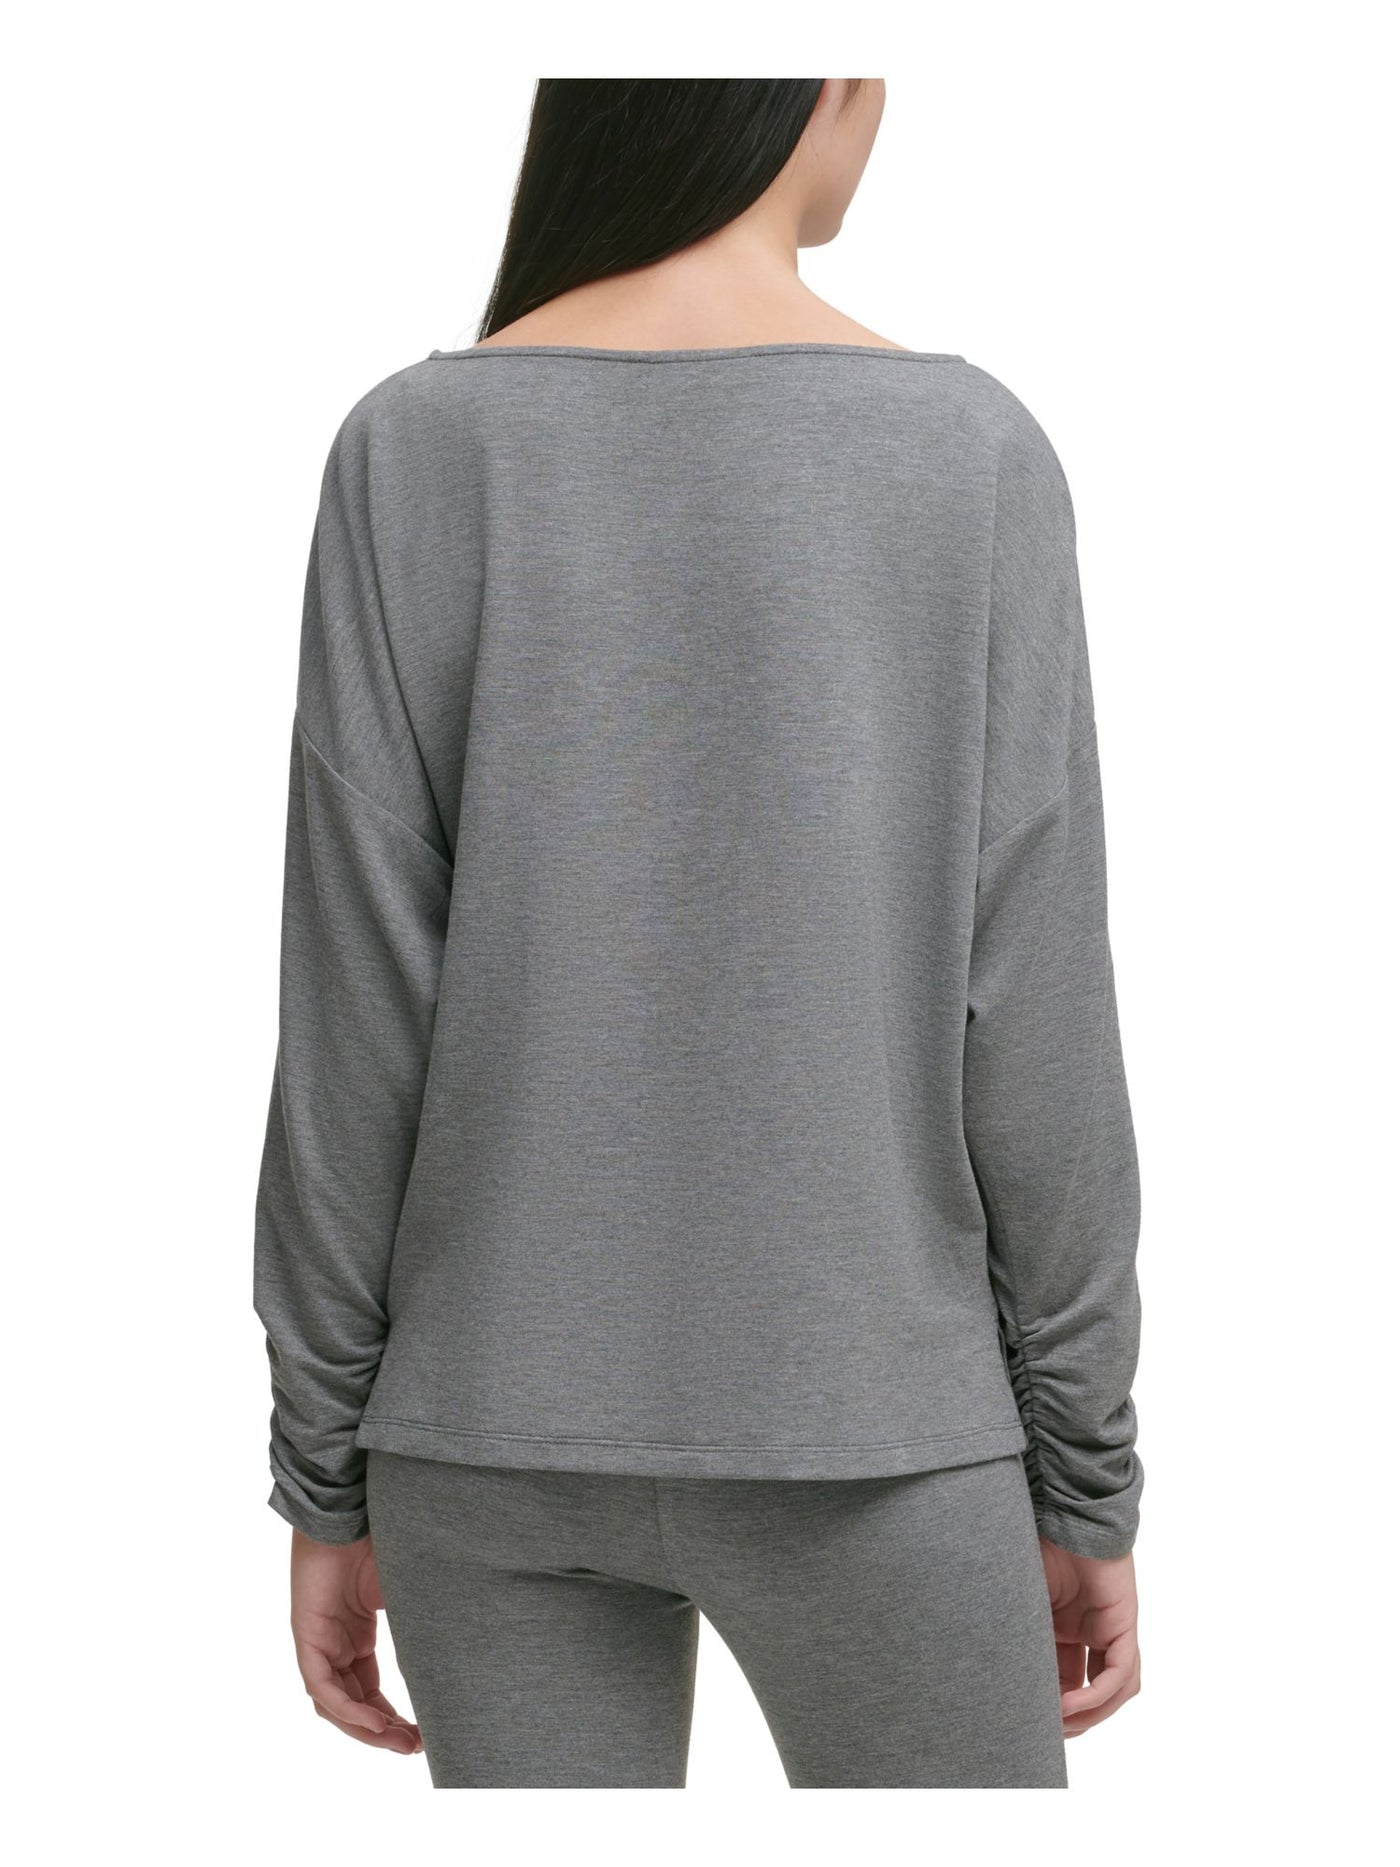 DKNY Womens Gray Ruched Long Sleeve Scoop Neck T-Shirt Size: XXS